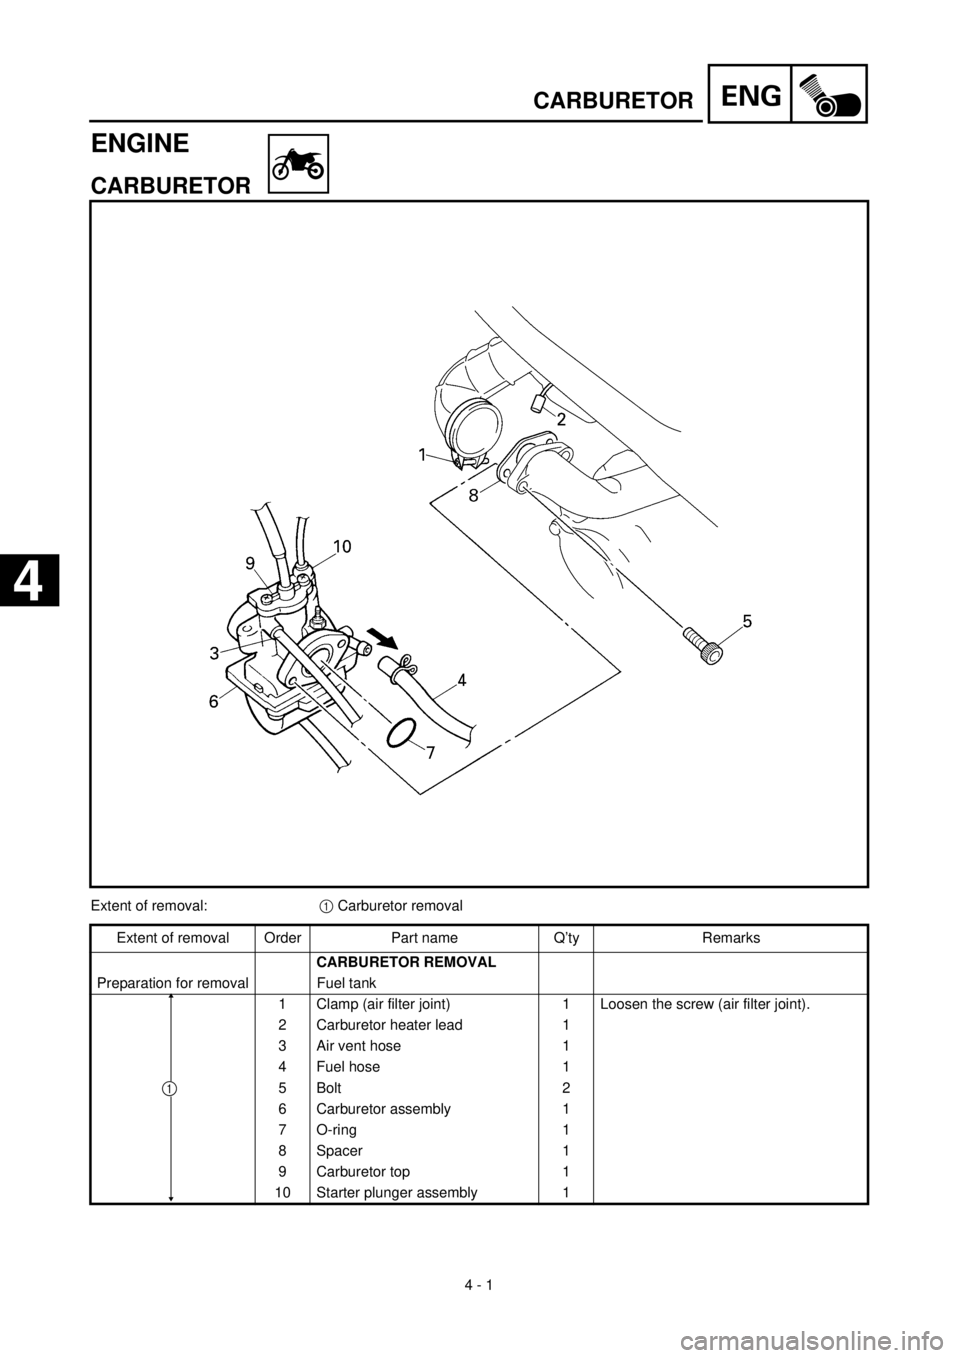 YAMAHA TTR90 2000  Owners Manual  
4 - 1
ENG
 
ENGINE 
CARBURETOR 
Extent of removal:  
1  
 Carburetor removal
Extent of removal Order Part name Q’ty Remarks  
CARBURETOR REMOVAL  
Preparation for removal Fuel tank
1 Clamp (air fi